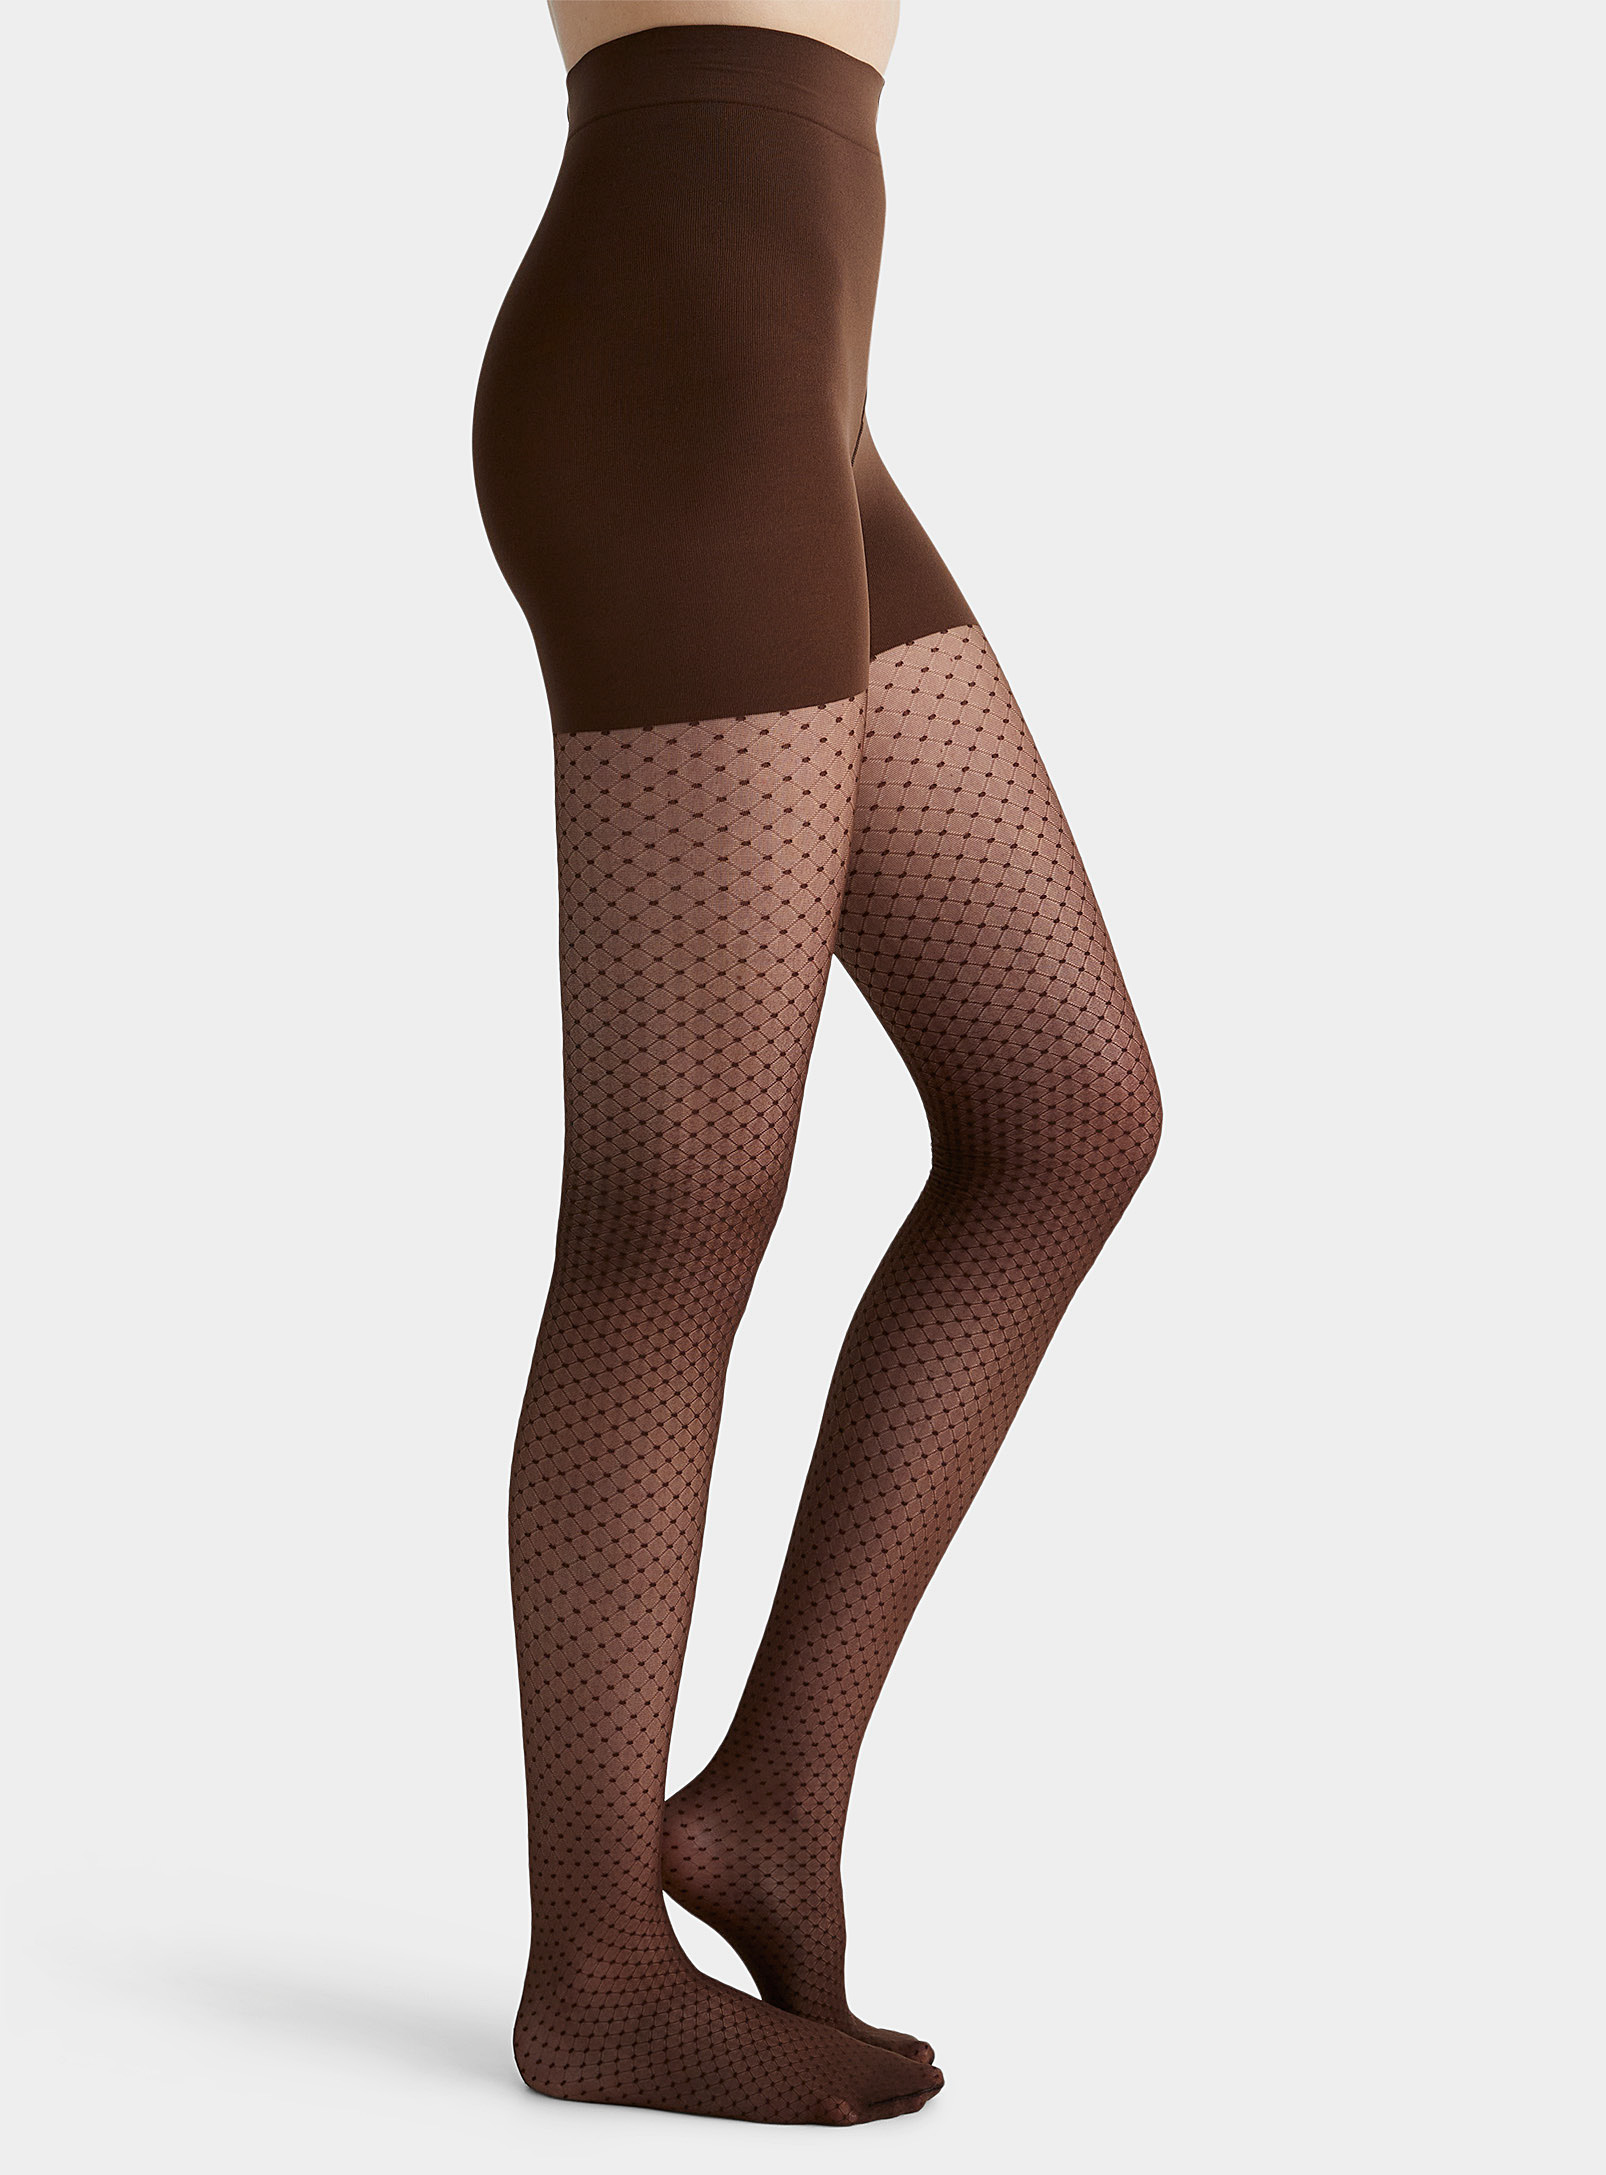 Rose and fishnet footless tights, Pretty Polly